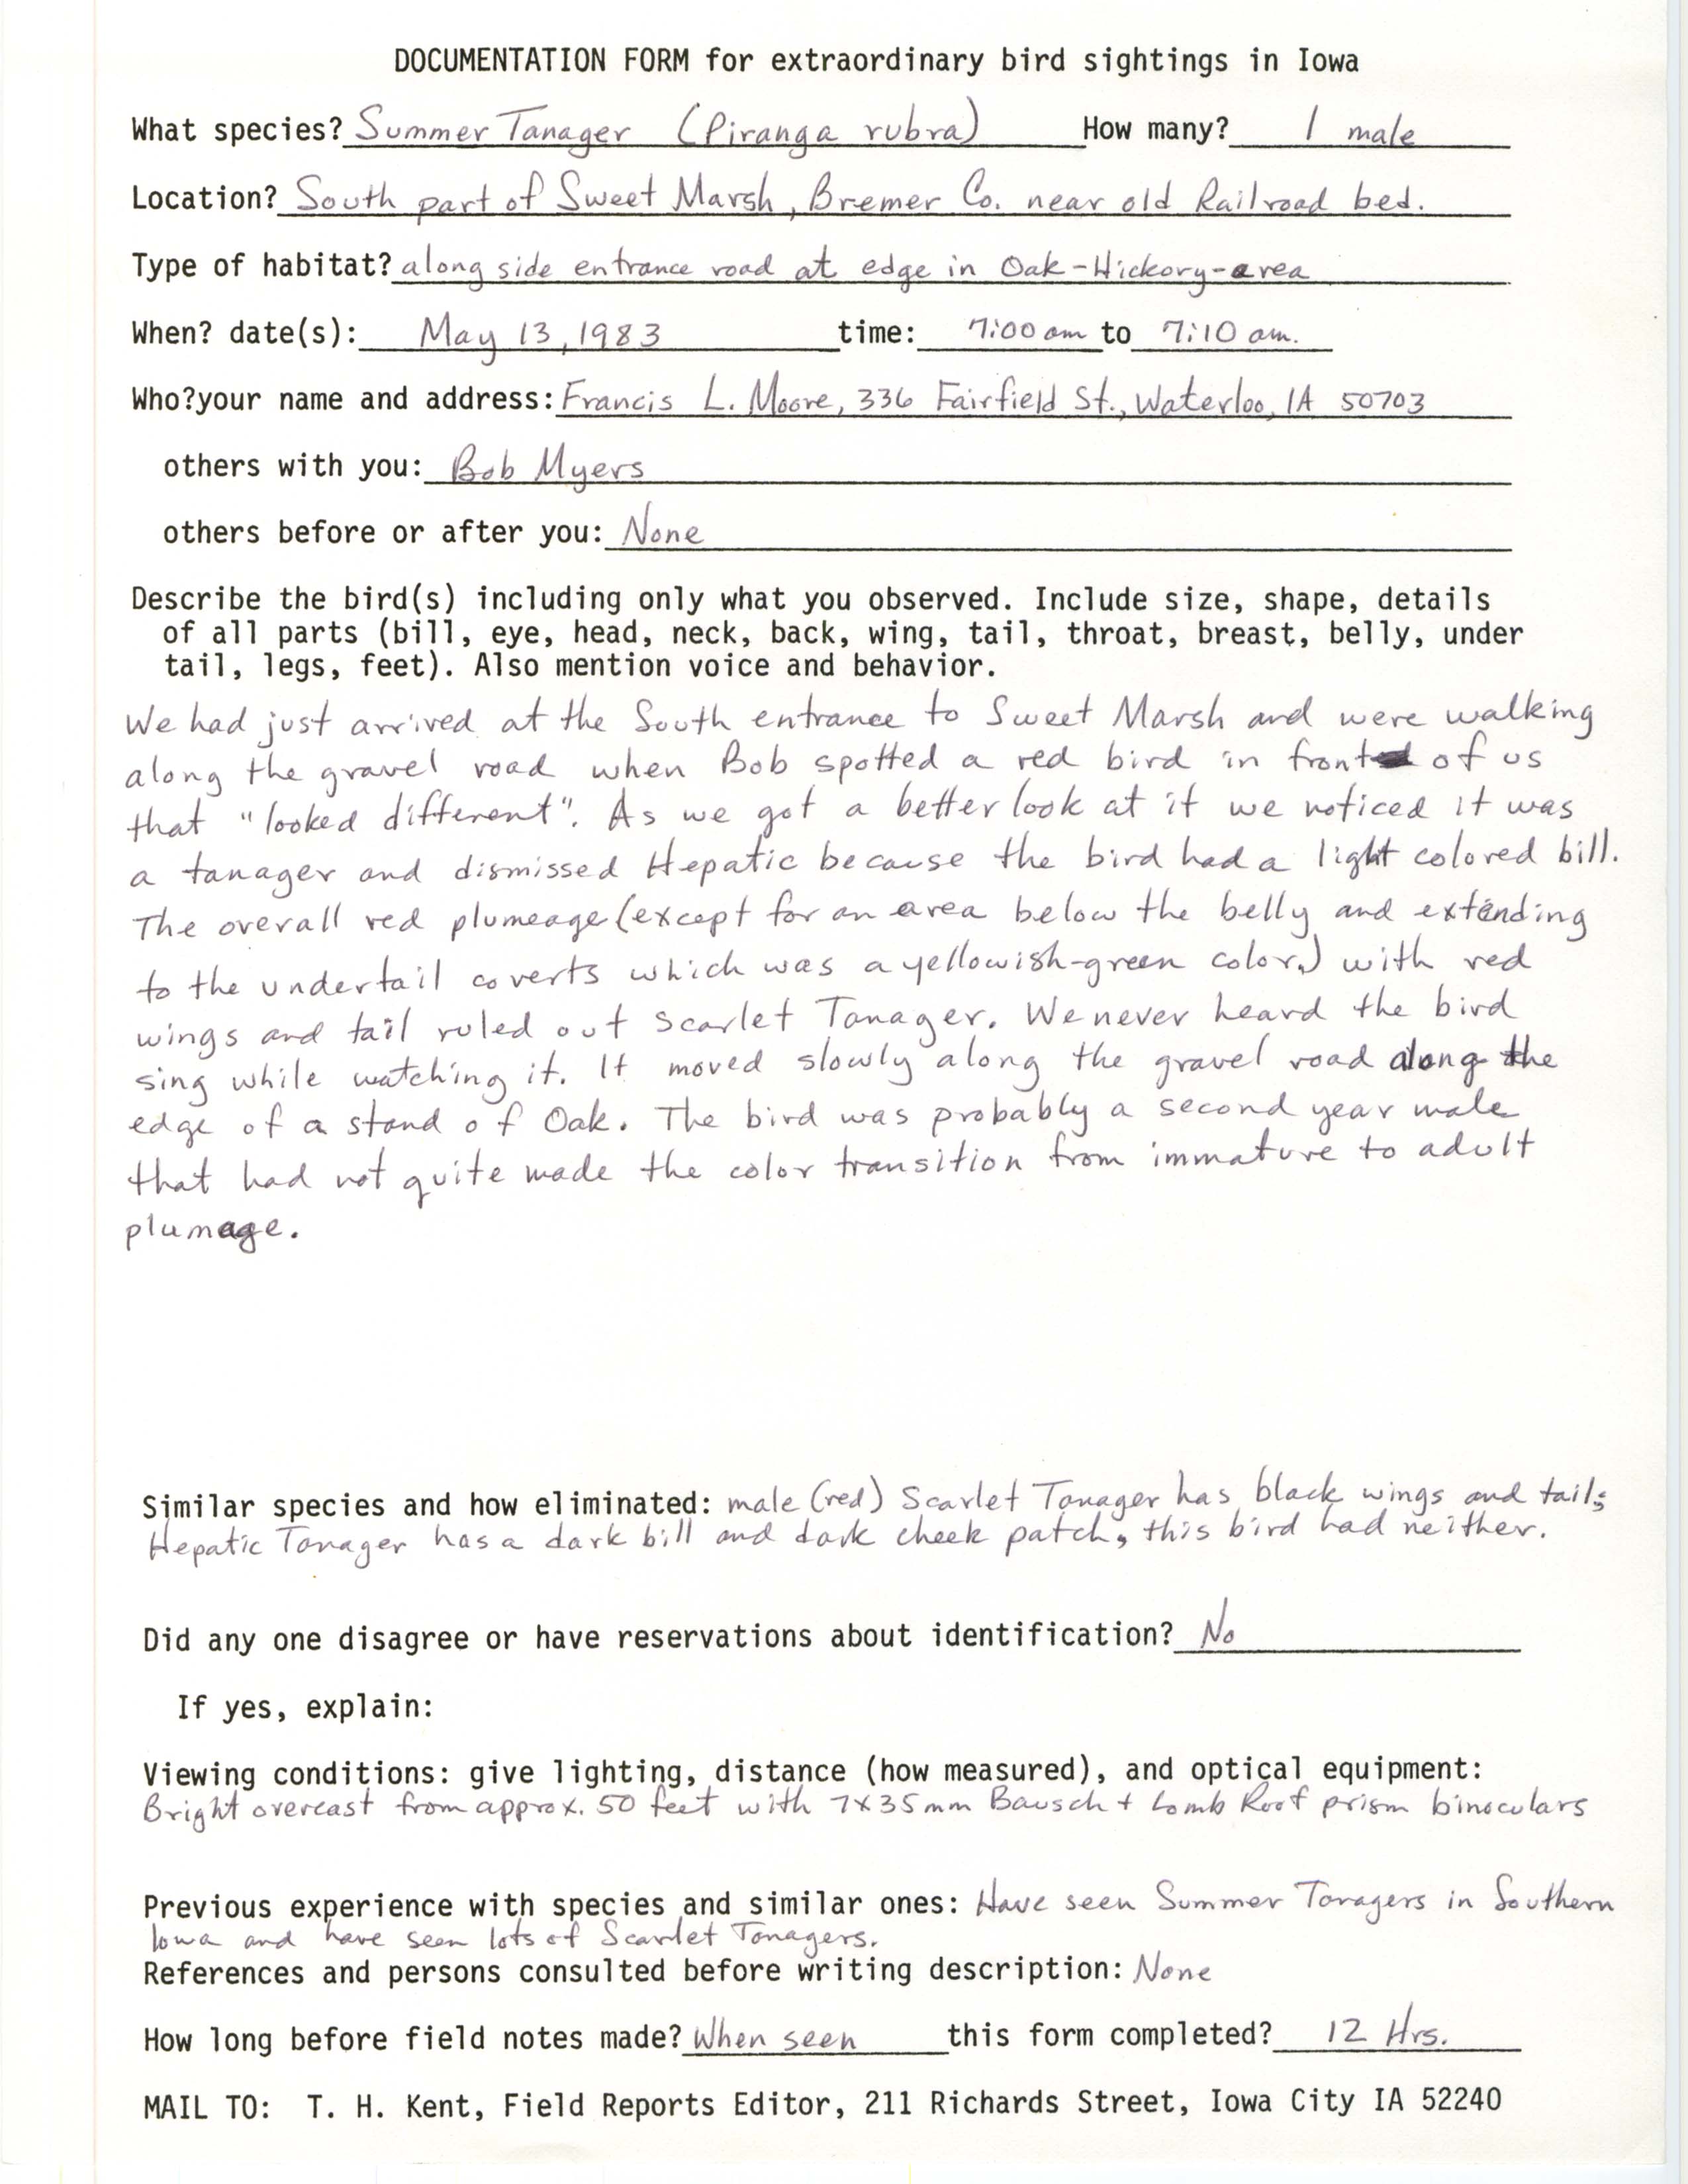 Rare bird documentation form for Summer Tanager at Sweet Marsh, 1983